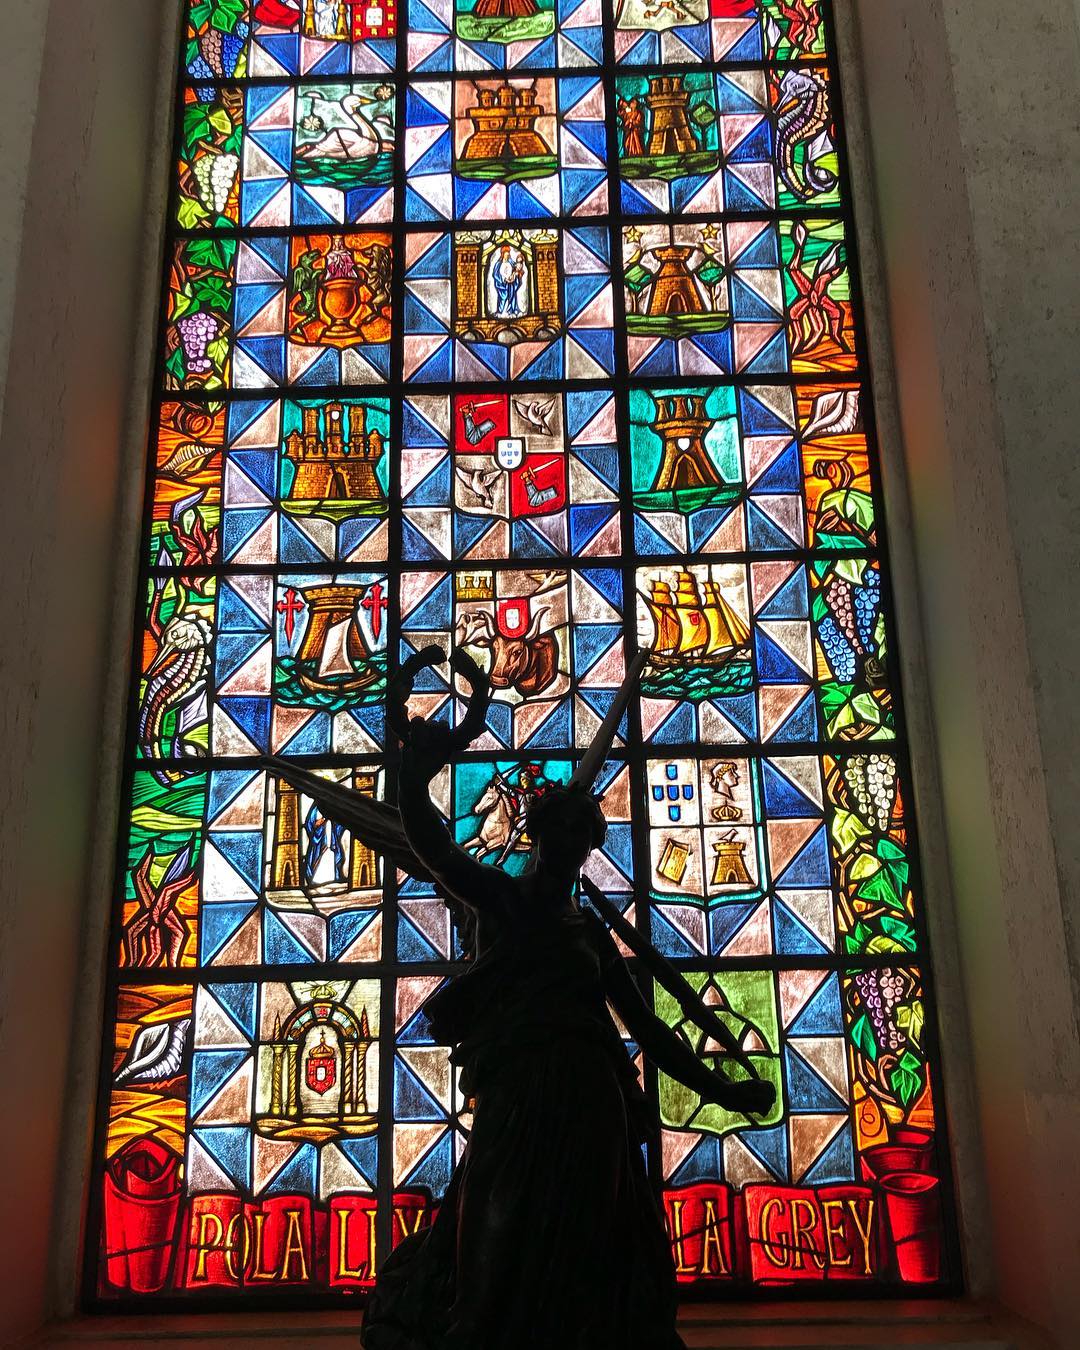 Stained glass at our hotel. #nofilter #portugal #pousadad...